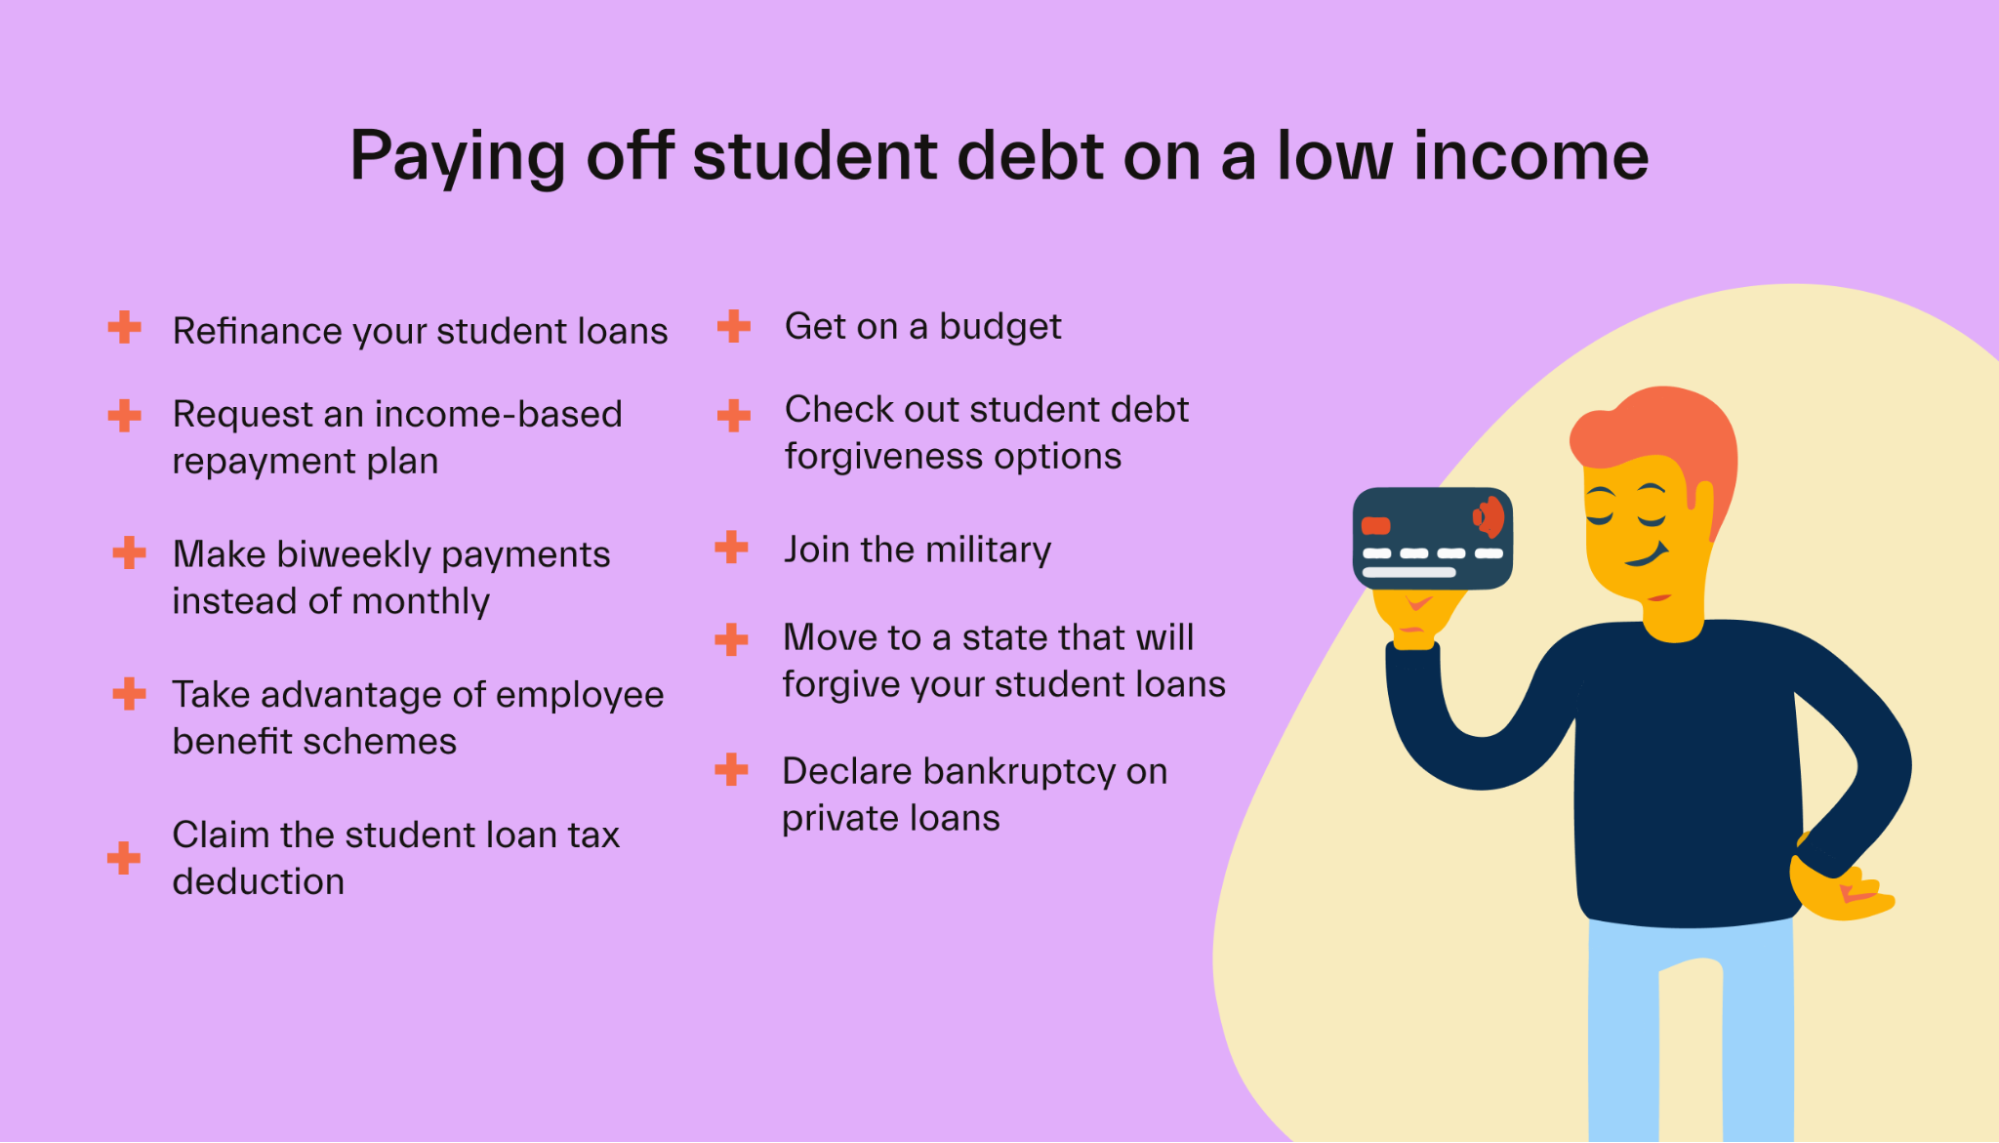 Paying off student debt on a low income